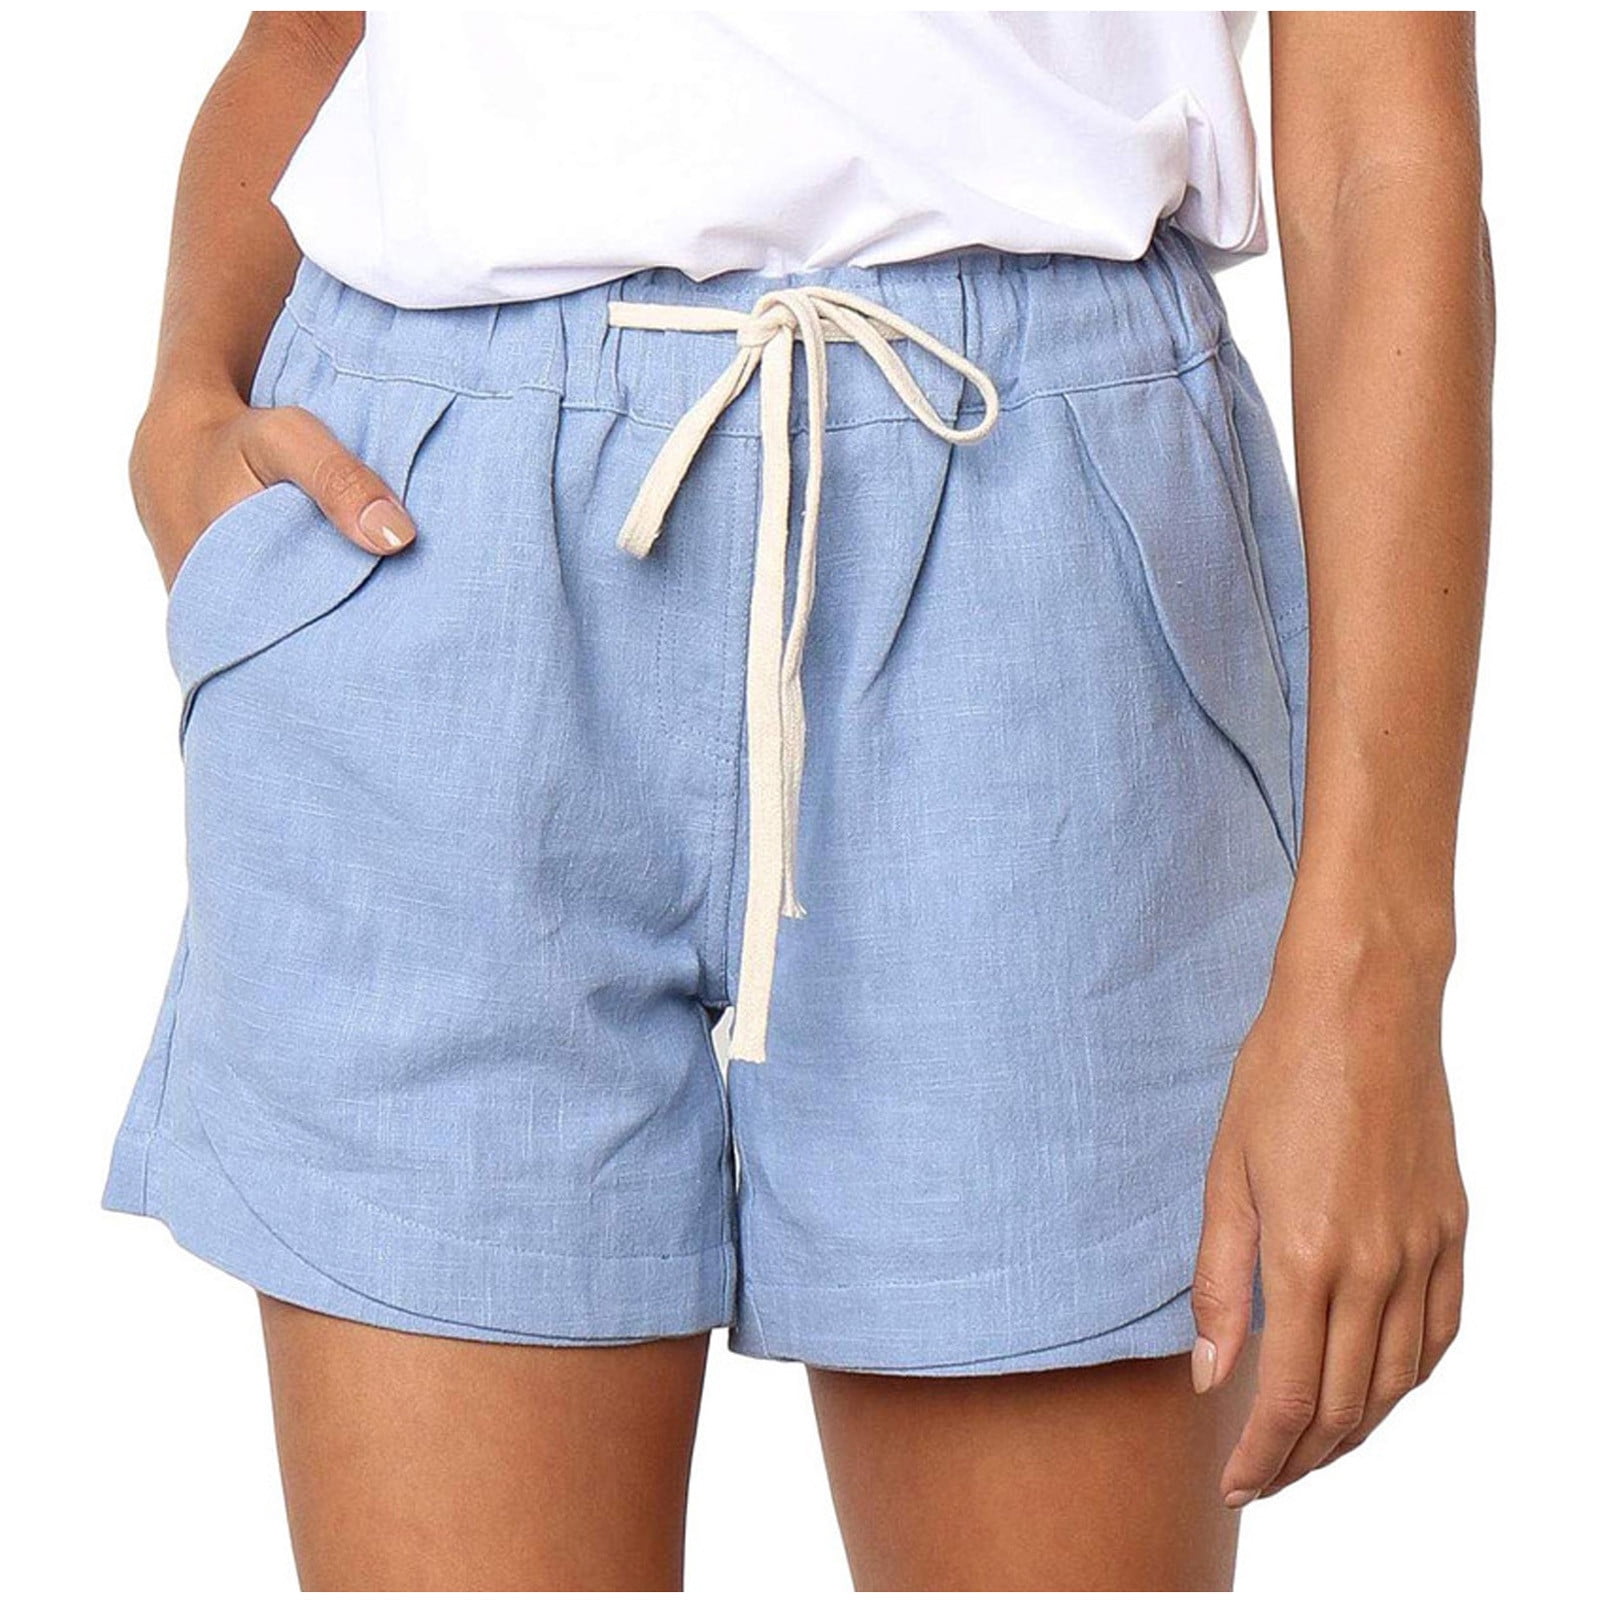 Shorts for Women Clearance,AIEOTT Womens Shorts,Womens Plus Size ...